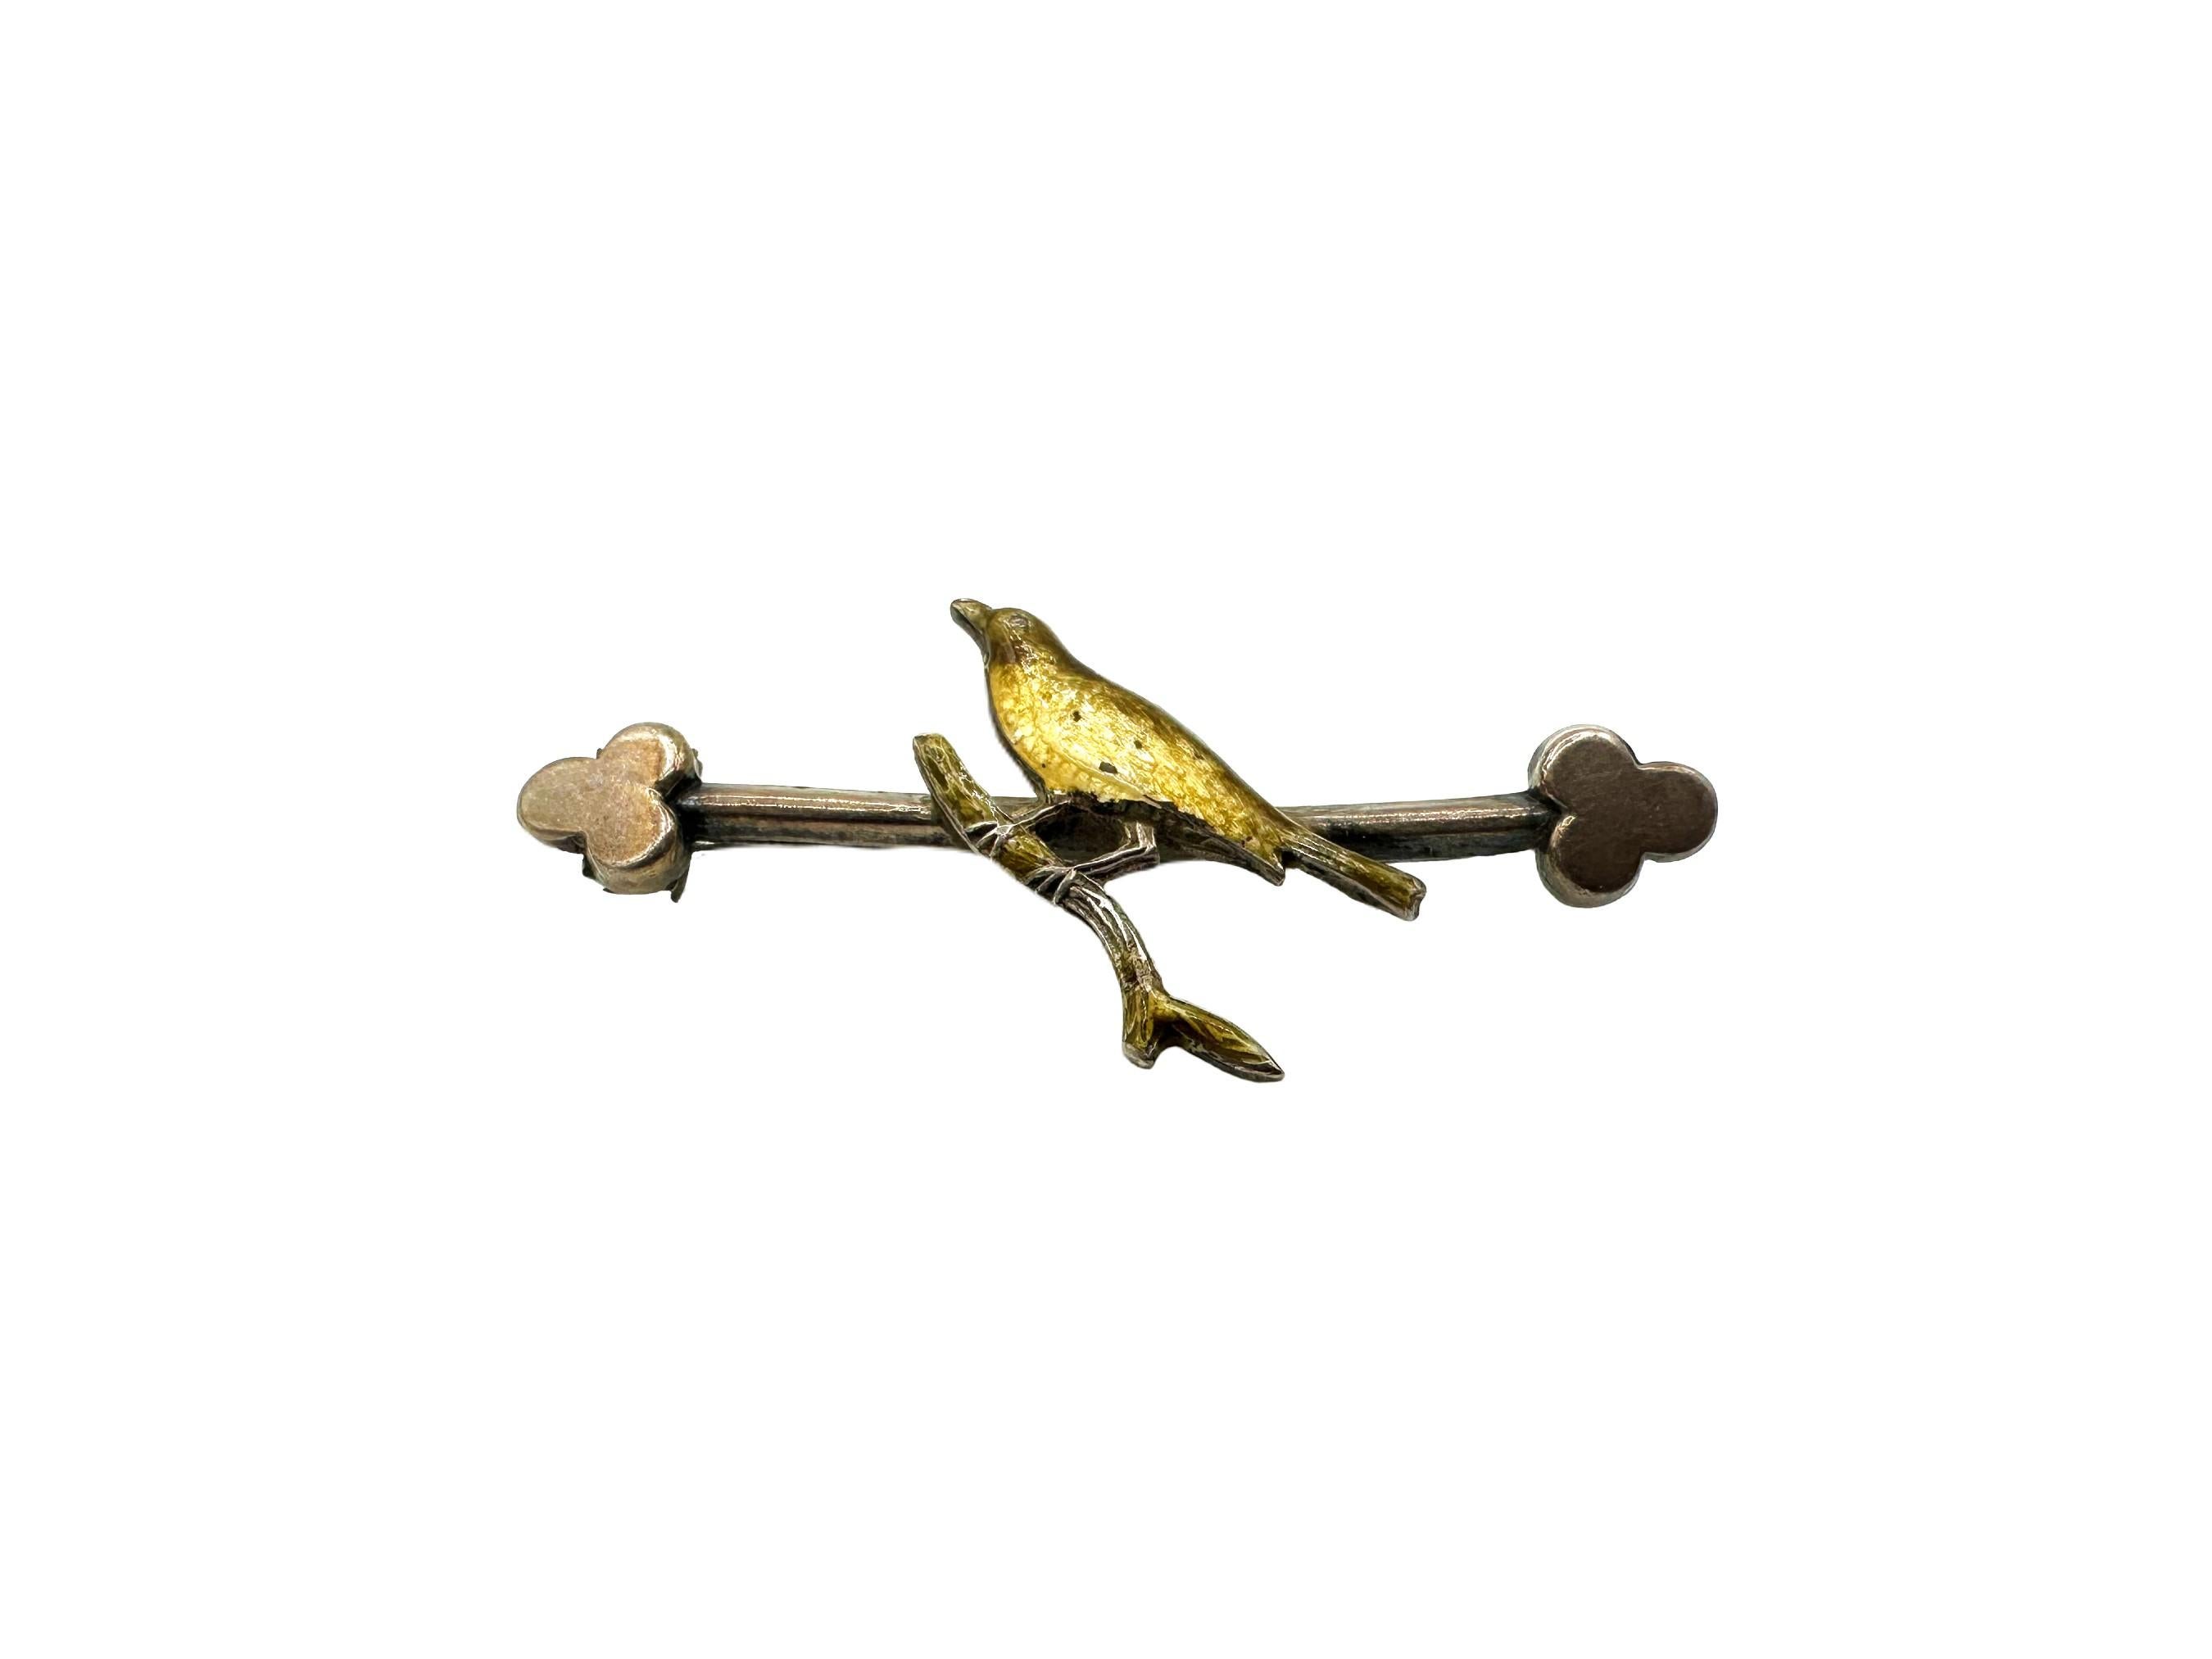 This hand-crafted antique Victorian brooch was forged from sterling silver and features a sweet enameled yellow bird perched on a silver branch. During the Victorian era, bird watching and aviaries grew quite fashionable due to the work of